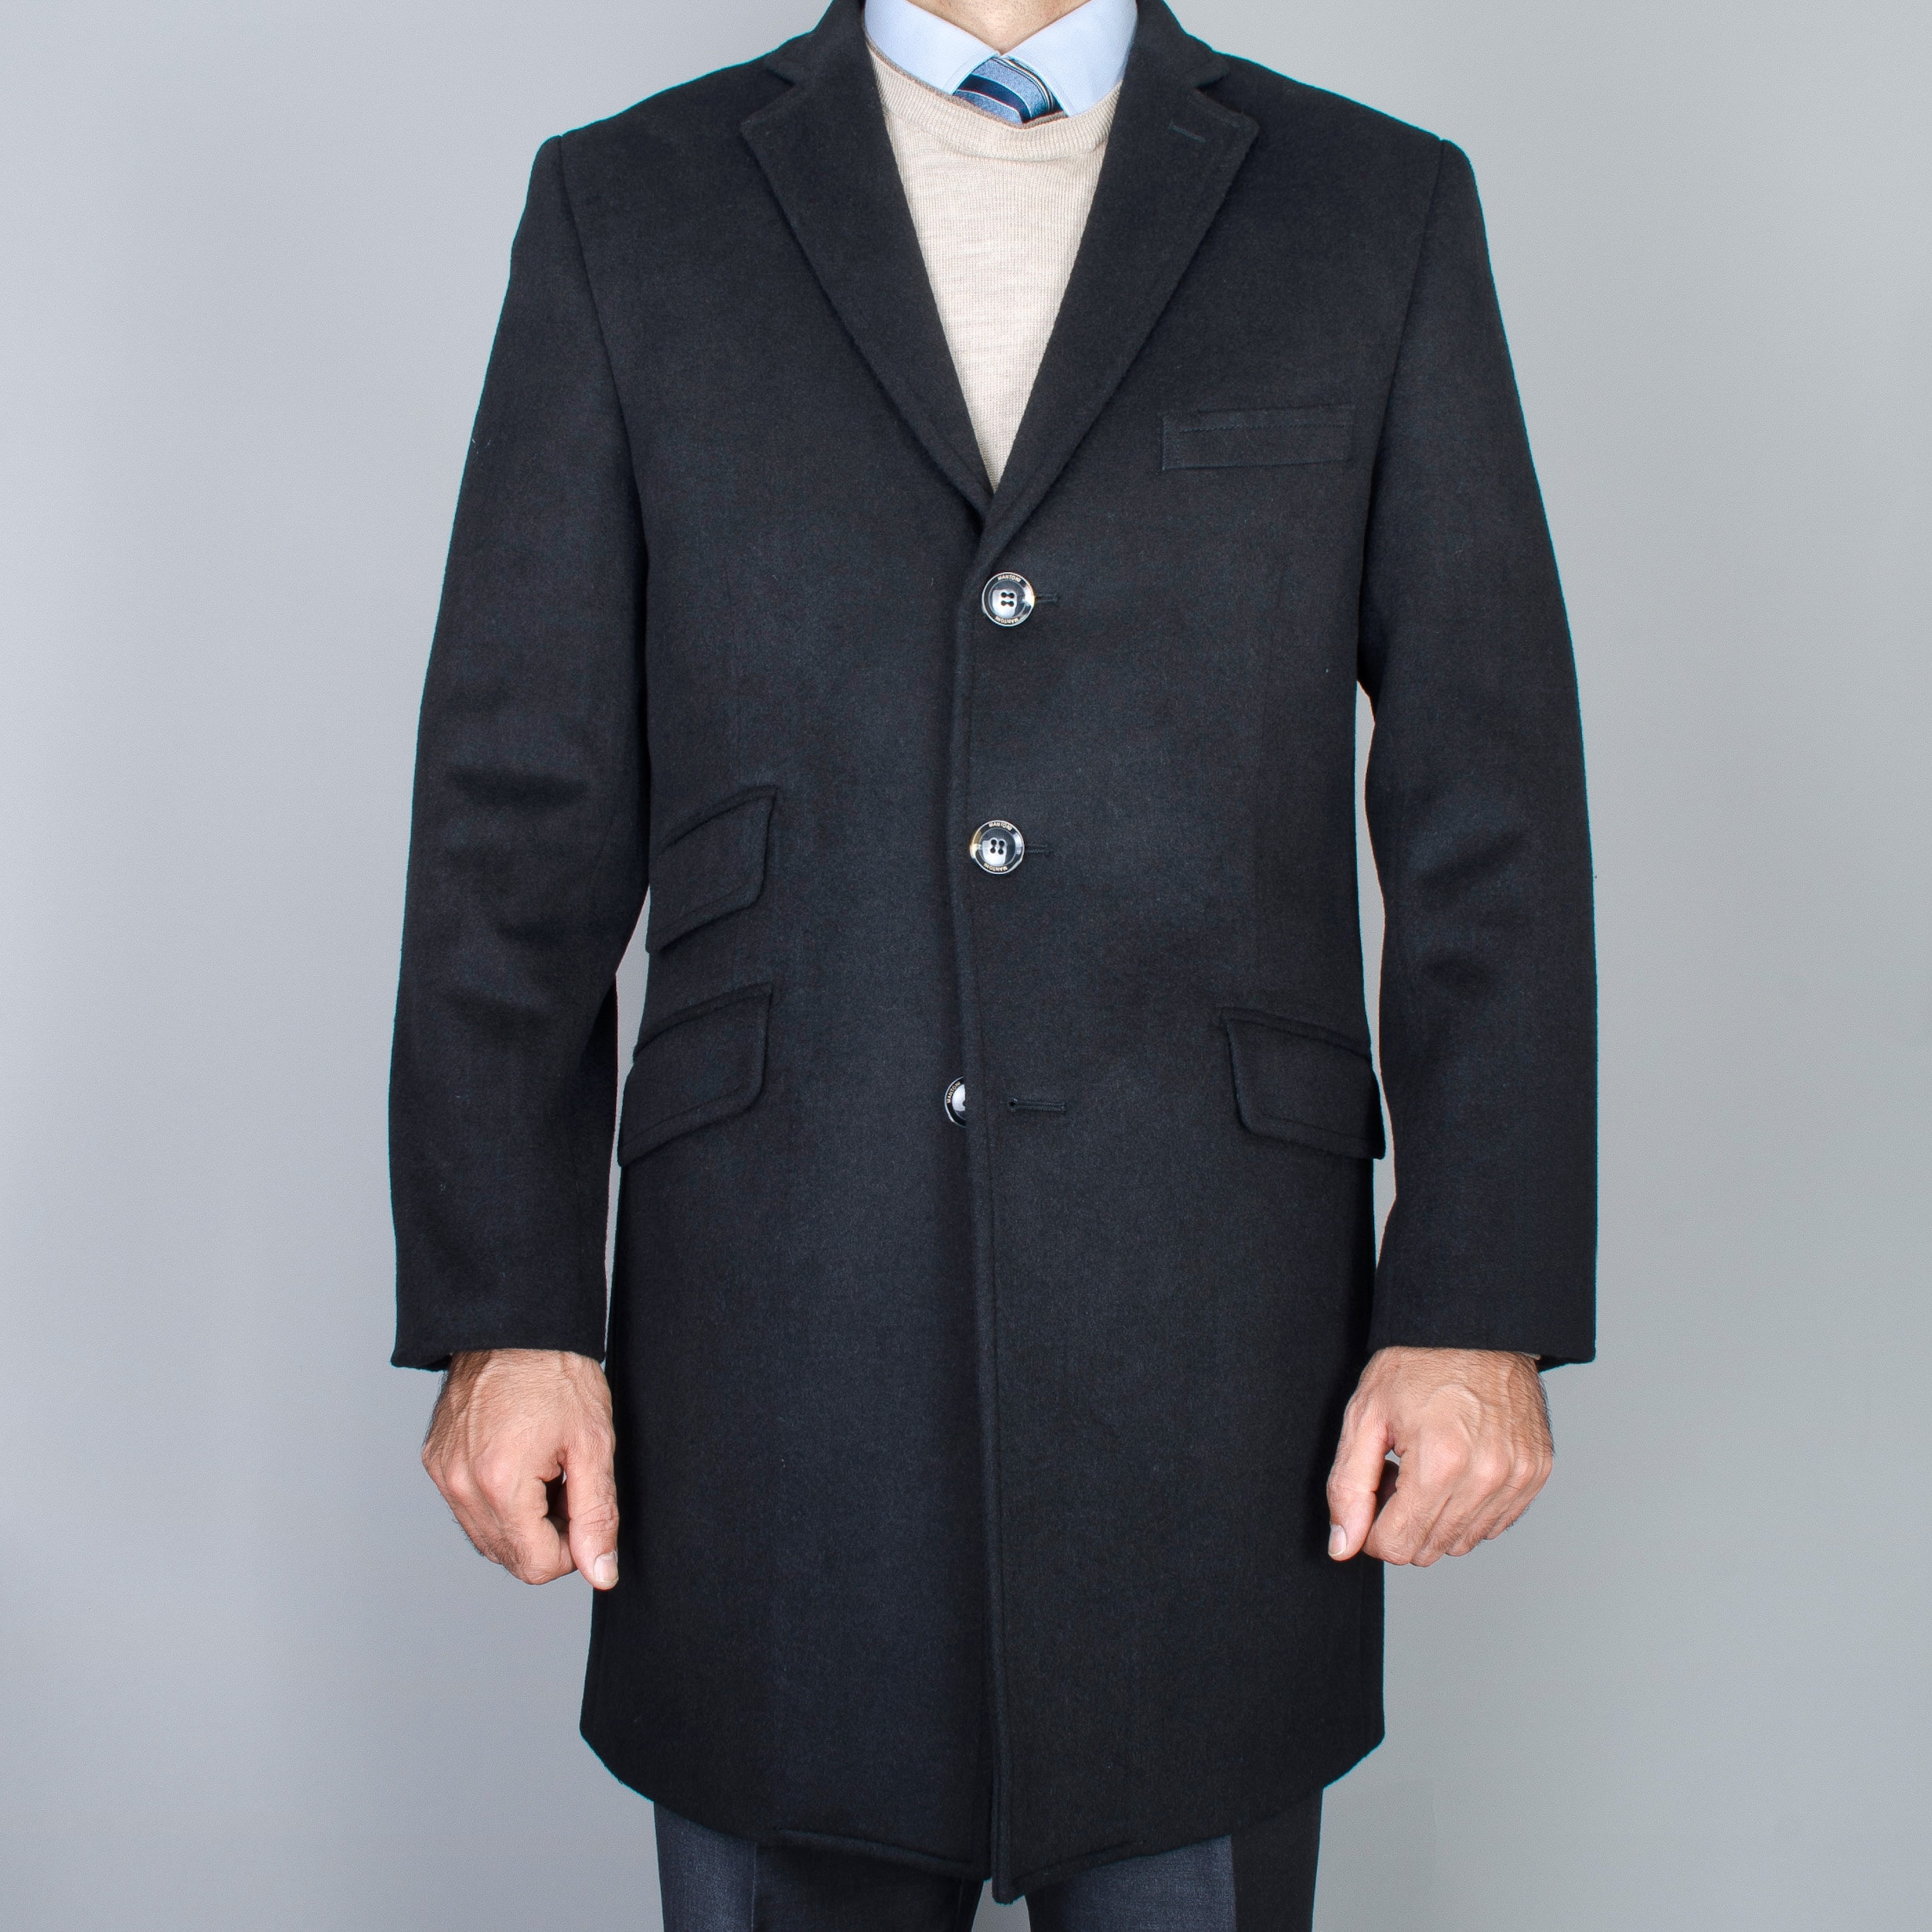 Shop Men's Black Wool Carcoat - On Sale - Free Shipping Today ...